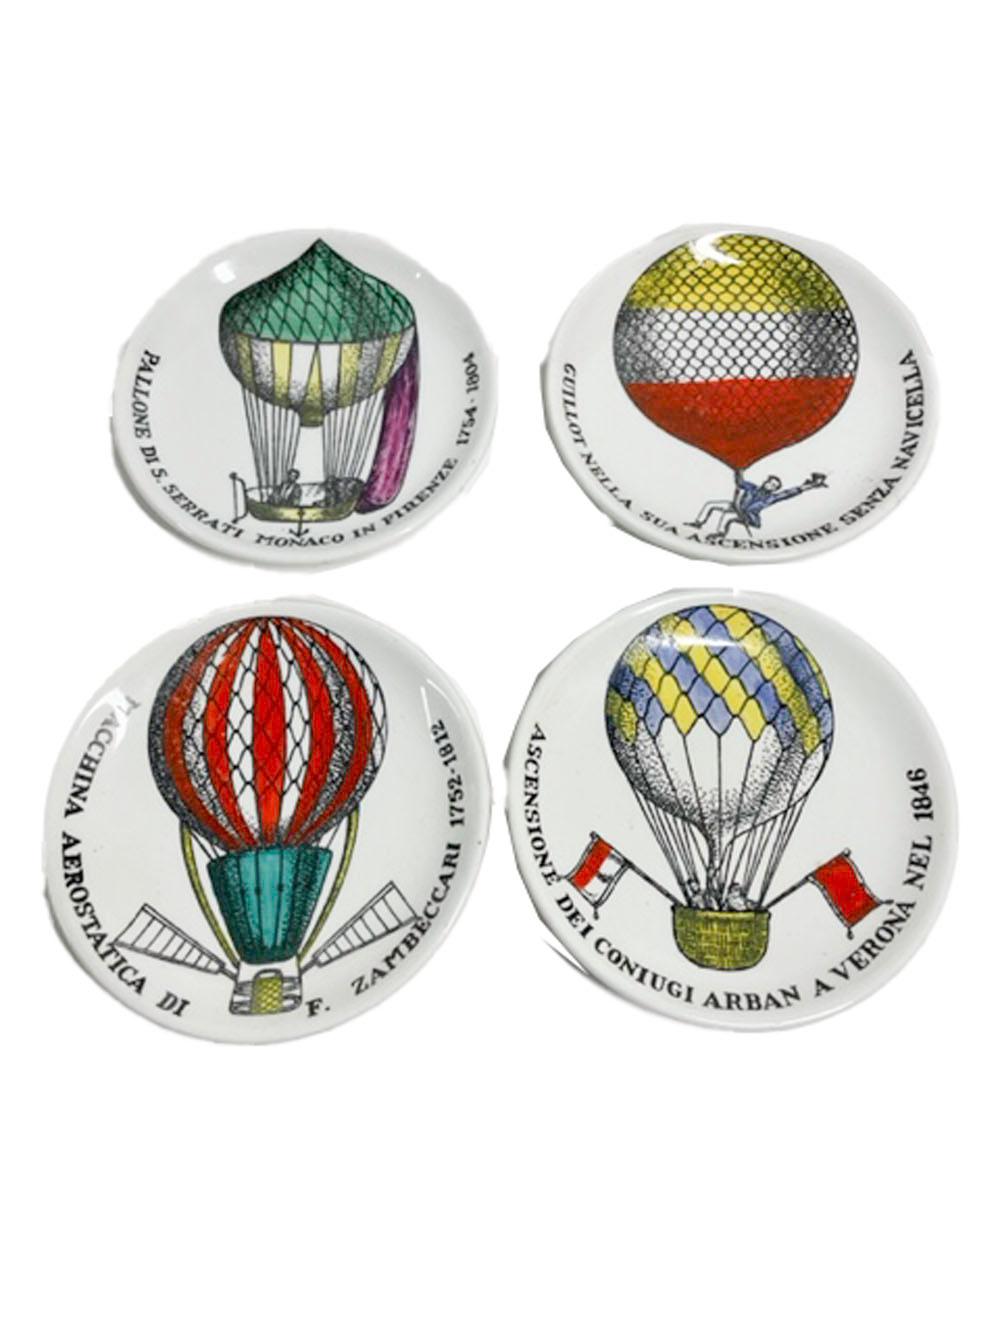 20th Century MCM Ceramic Coasters by Fornasetti, Painted with Hot Air Balloons, 